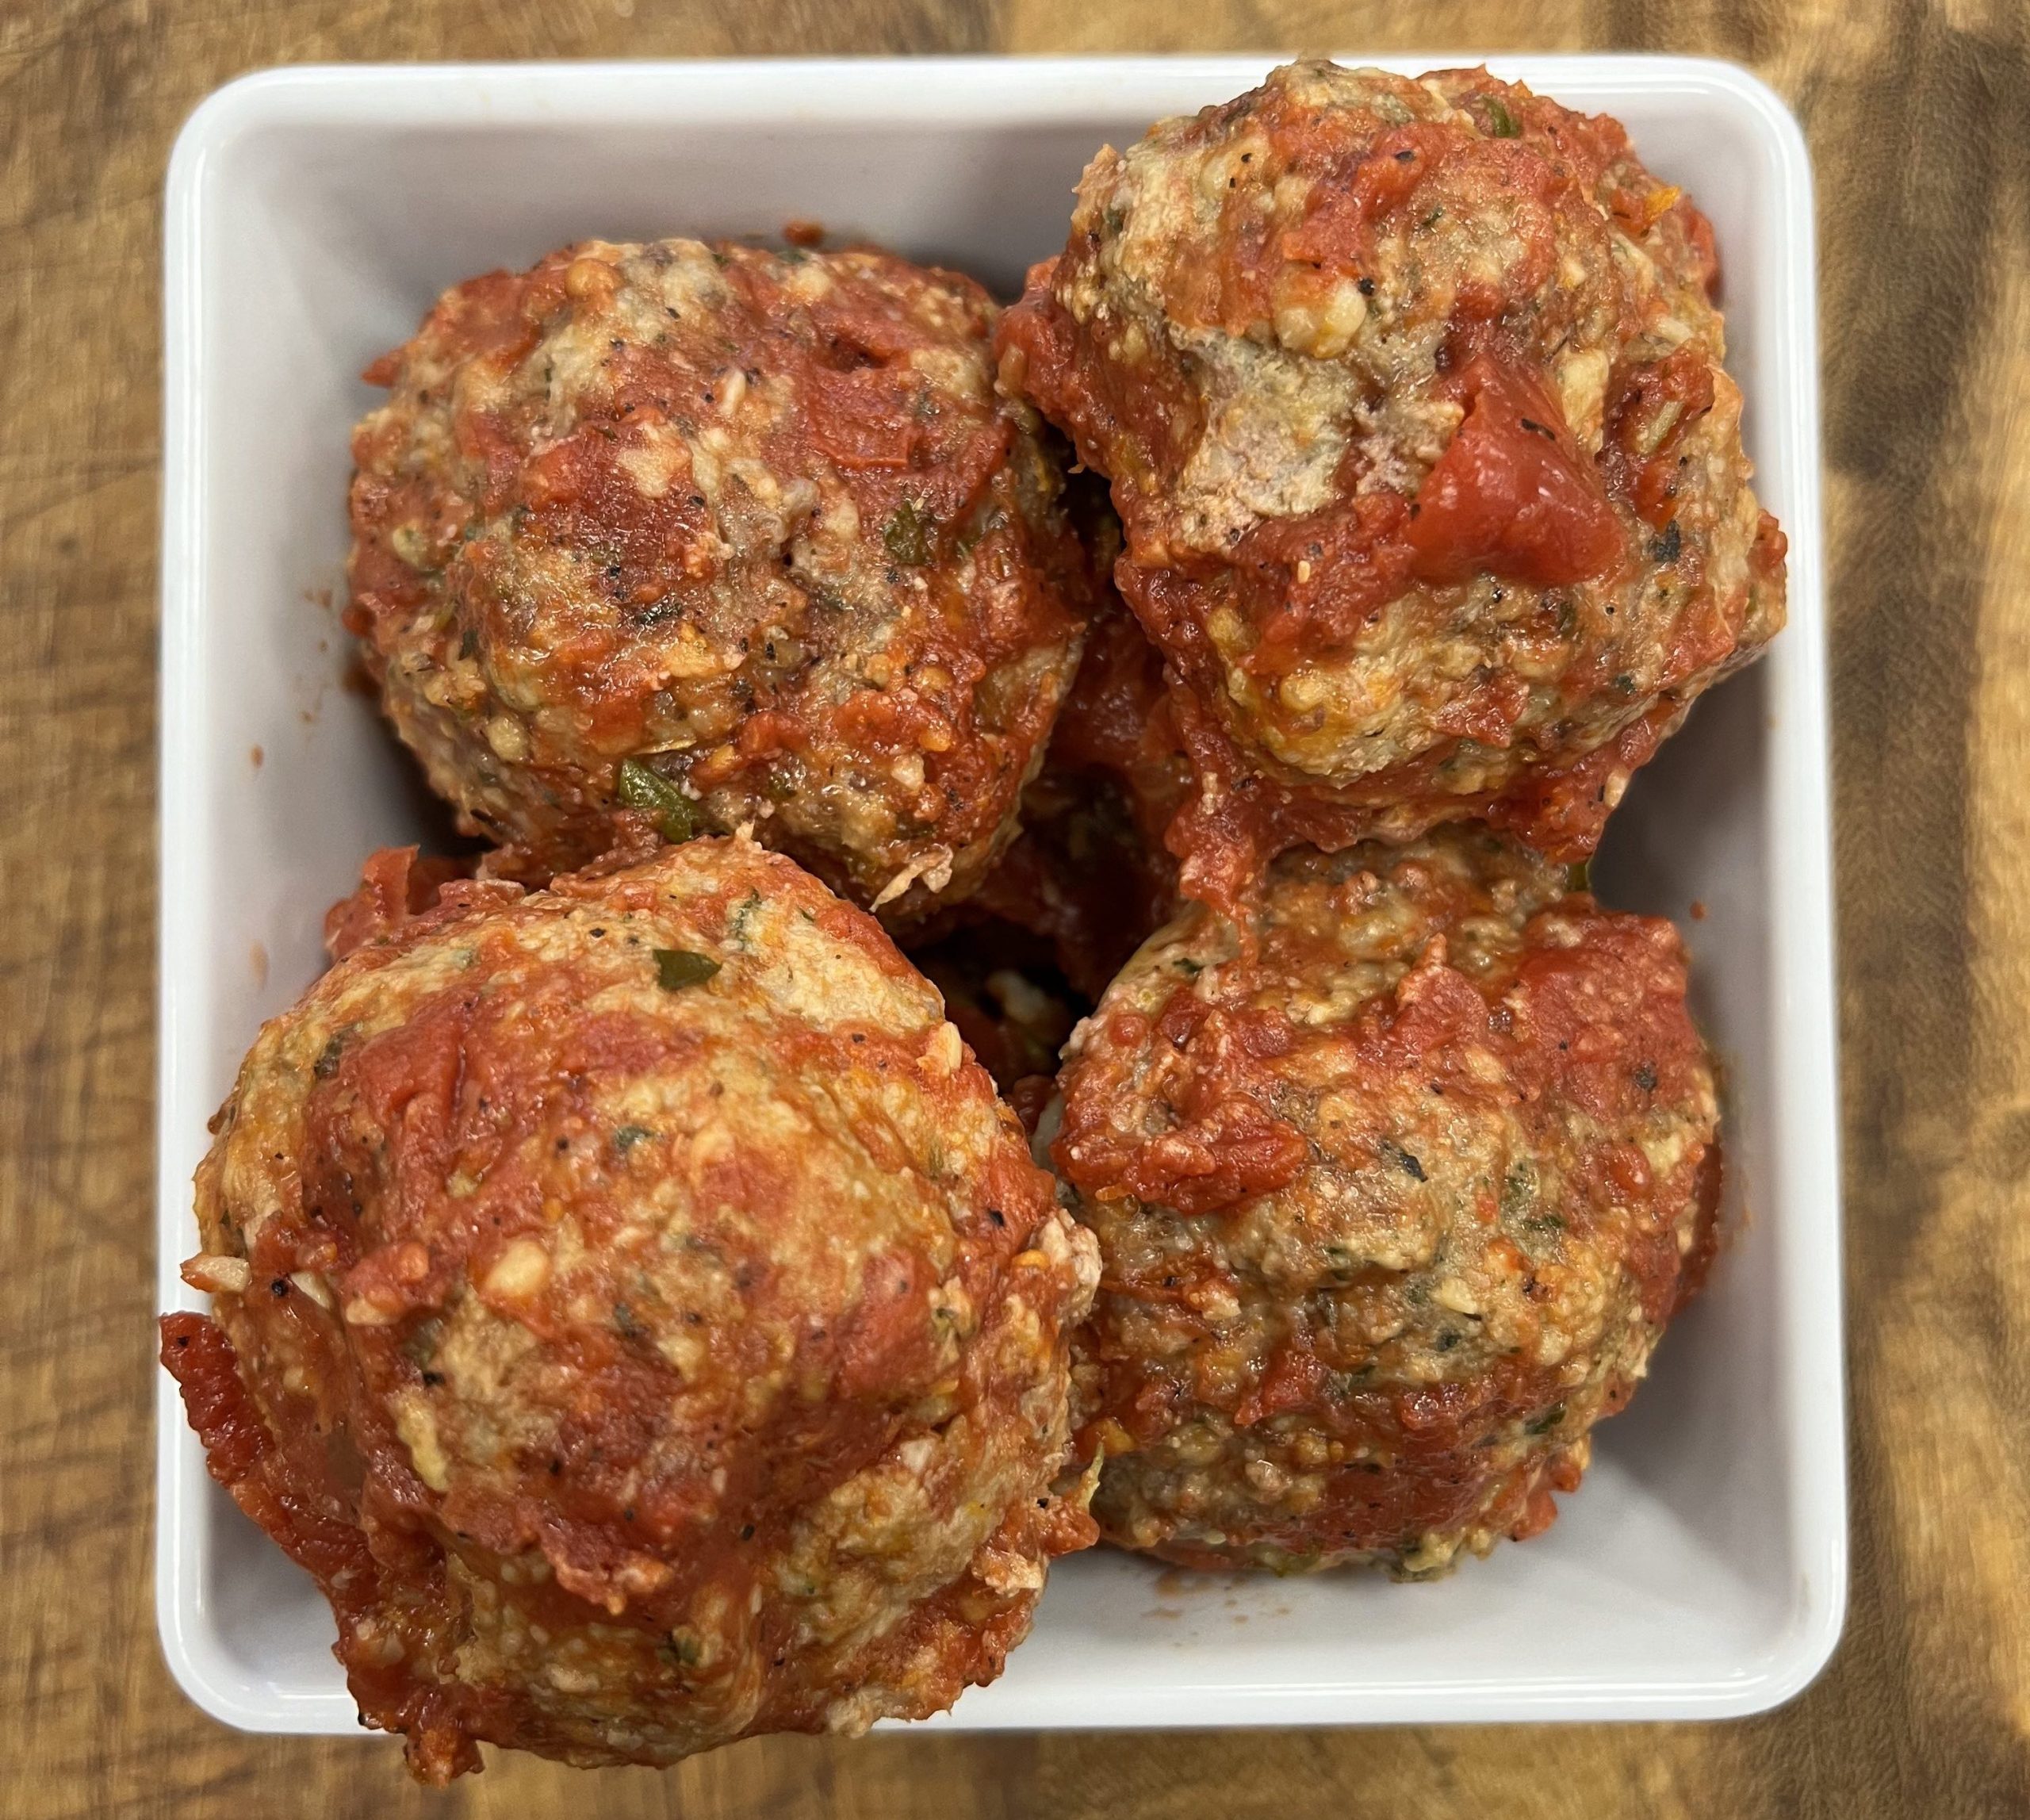 Aunt Shirleys Meatballs. Premade, precooked, just heat and eat!